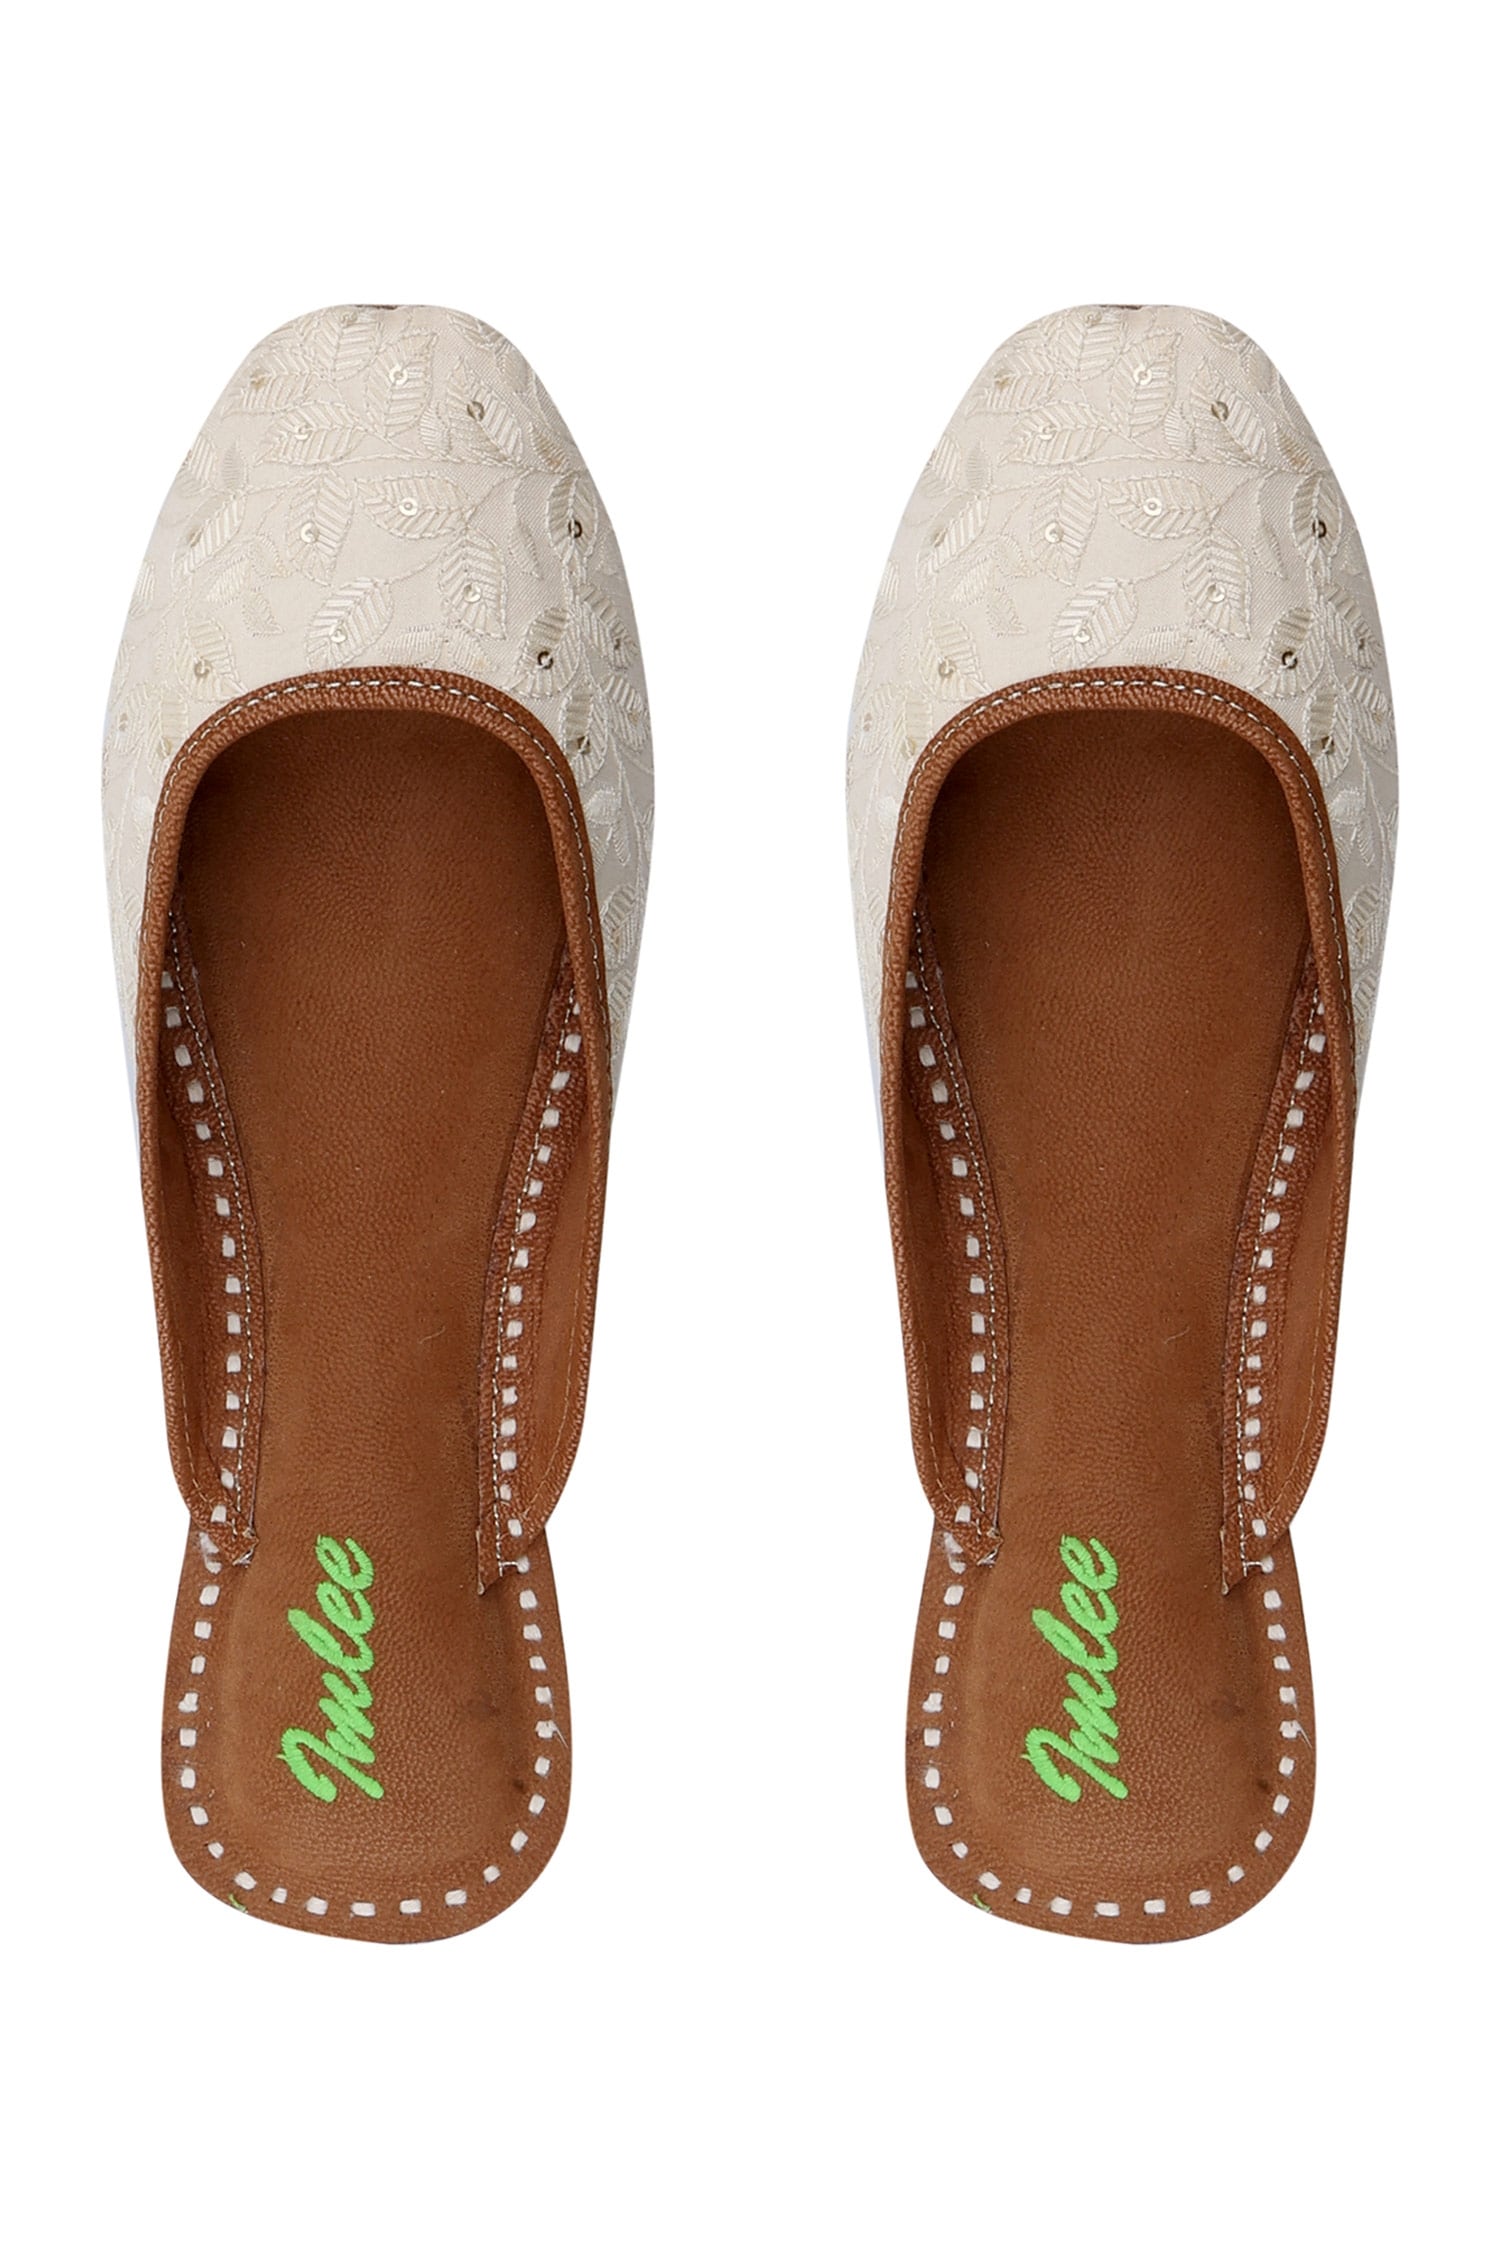 Buy Imlee Jaipur Off White Suede Leaf Embroidered Back Open Juttis ...